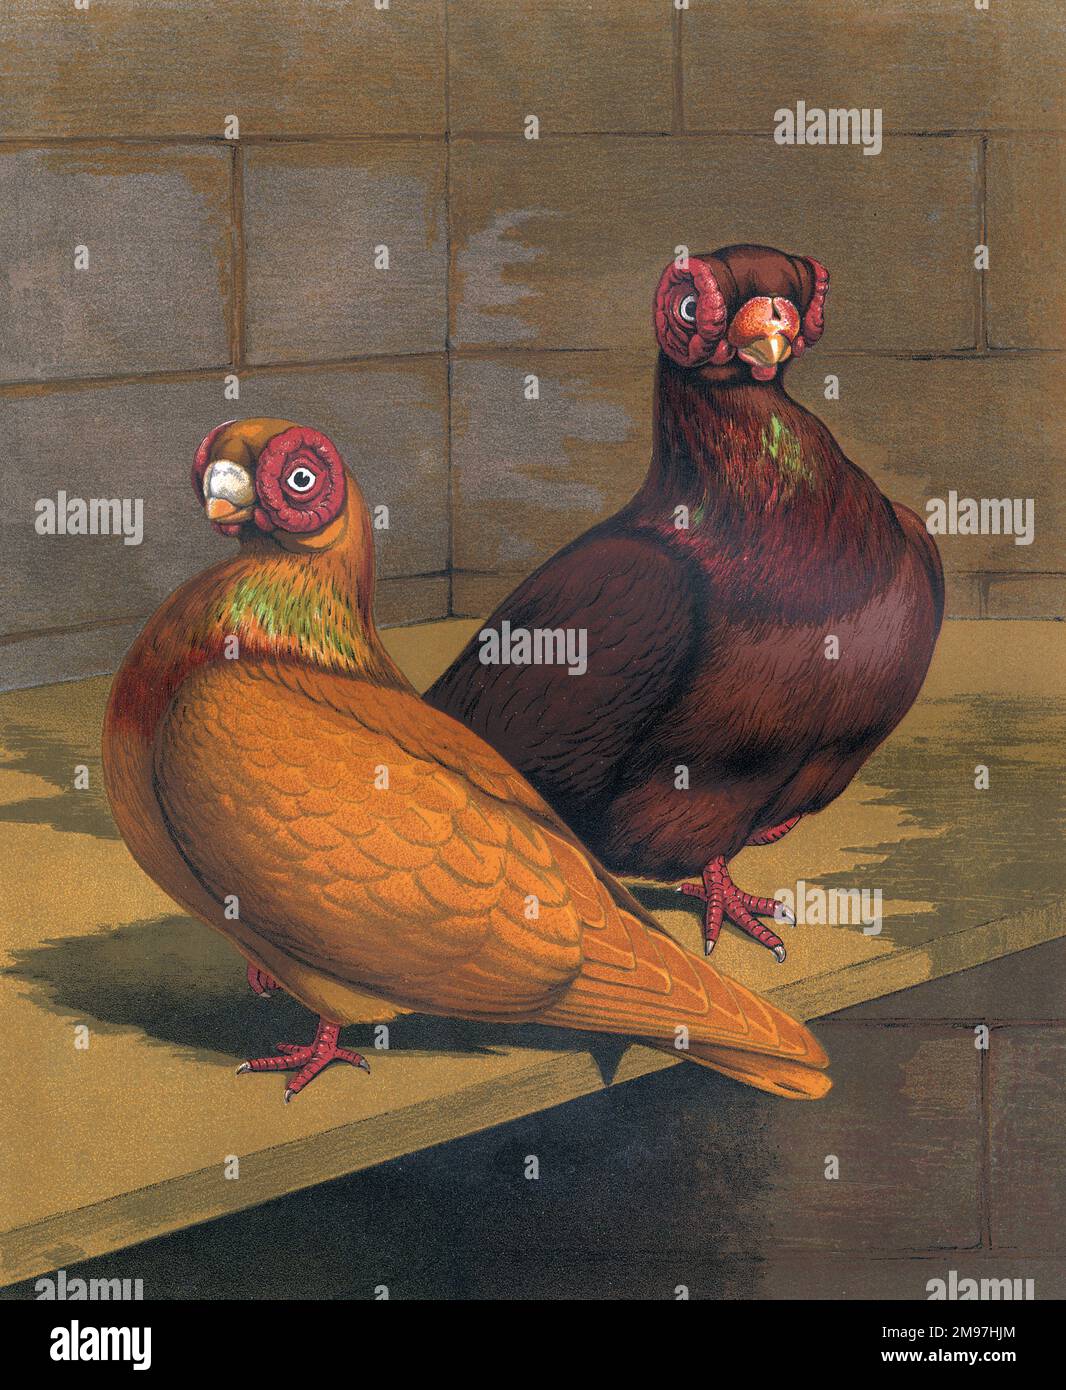 A portrait of a Red and Yellow Barb pictured inside their coop. The Barb is a breed of fancy pigeon developed over many years of selective breeding. The portrait illustrates their key features, such as their large coral red eye ceres, their short-faced beaks and small wattles, and their stout body shape. Stock Photo